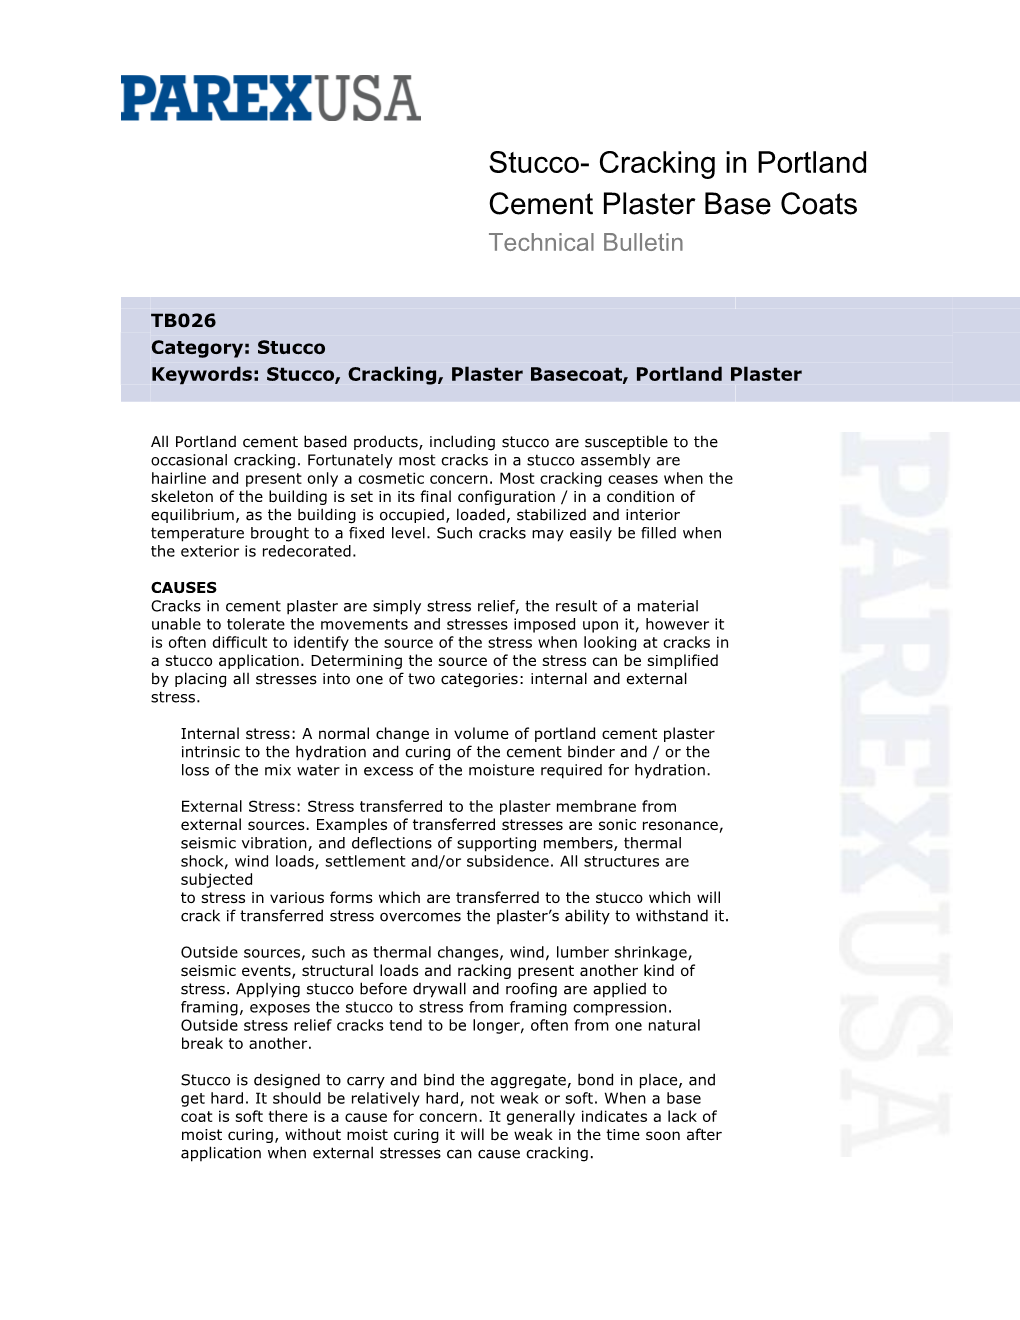 Cracking in Portland Cement Plaster Base Coats Technical Bulletin